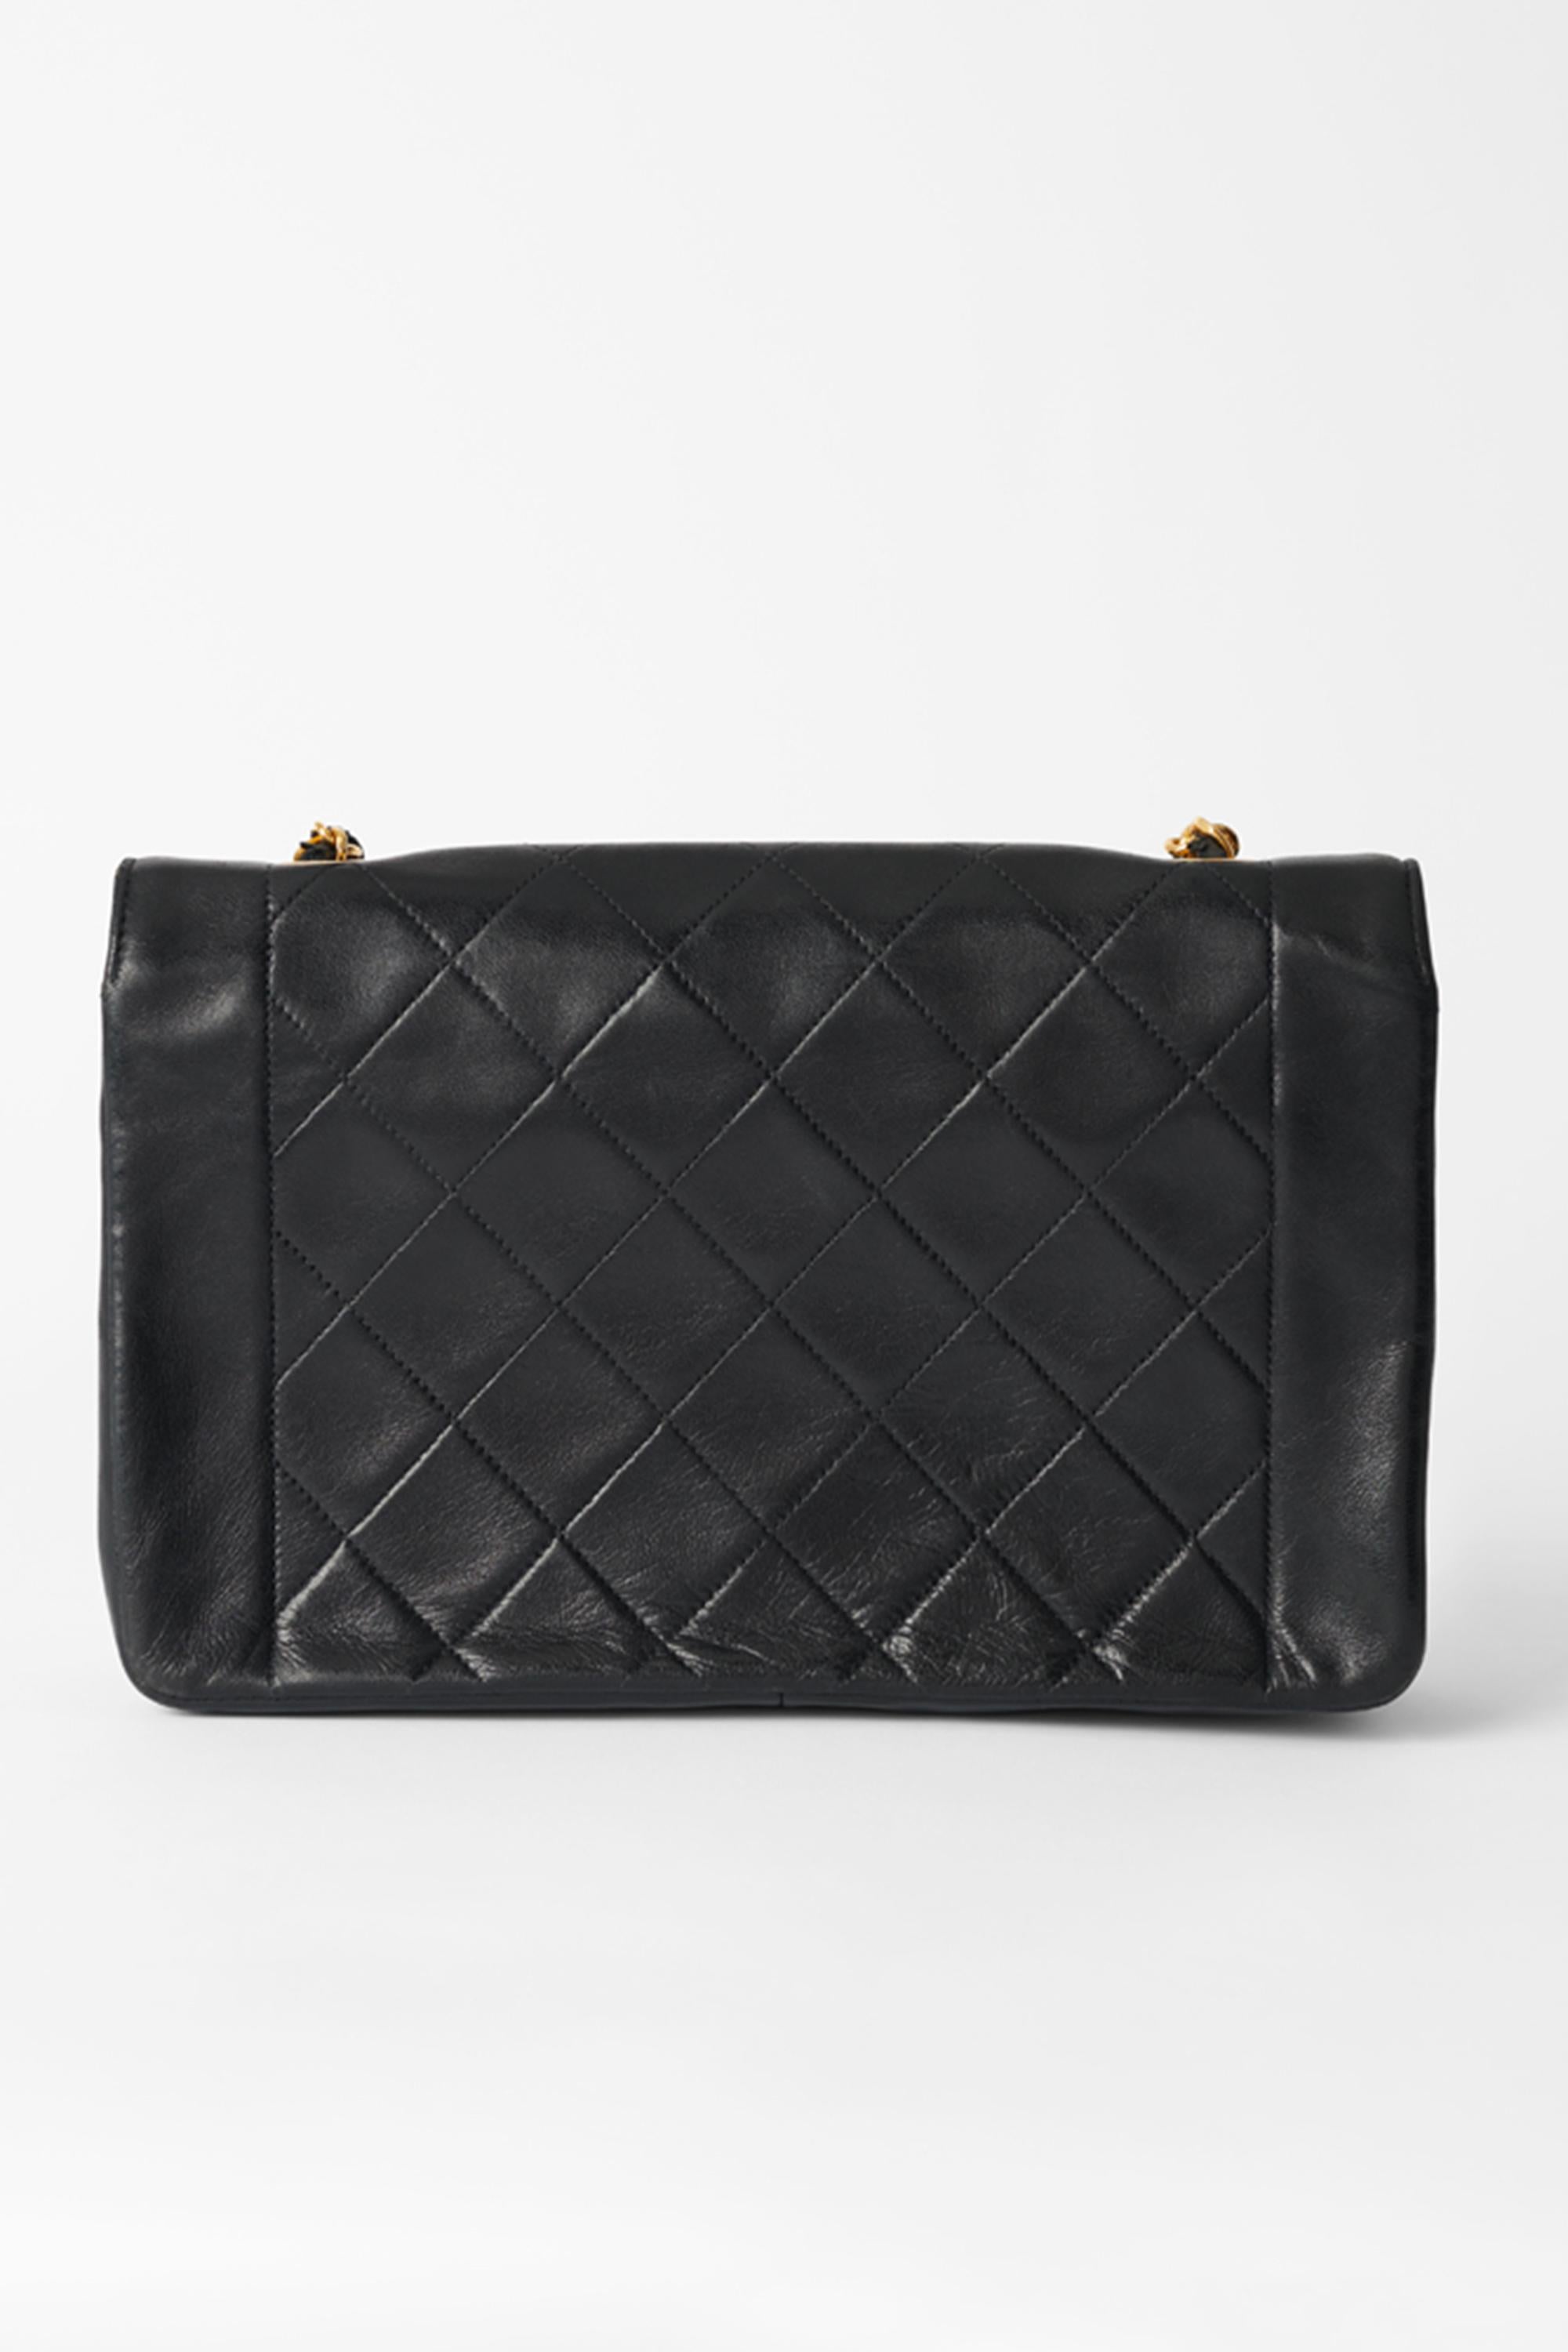 We are excited to present this iconic Vintage 1991/92  Chanel Diana flap bag in black quilted lambskin leather, gold metal hardware, a chain-handle in 24k gold metal interlaced with black leather for a shoulder carry gold plated metal closure on